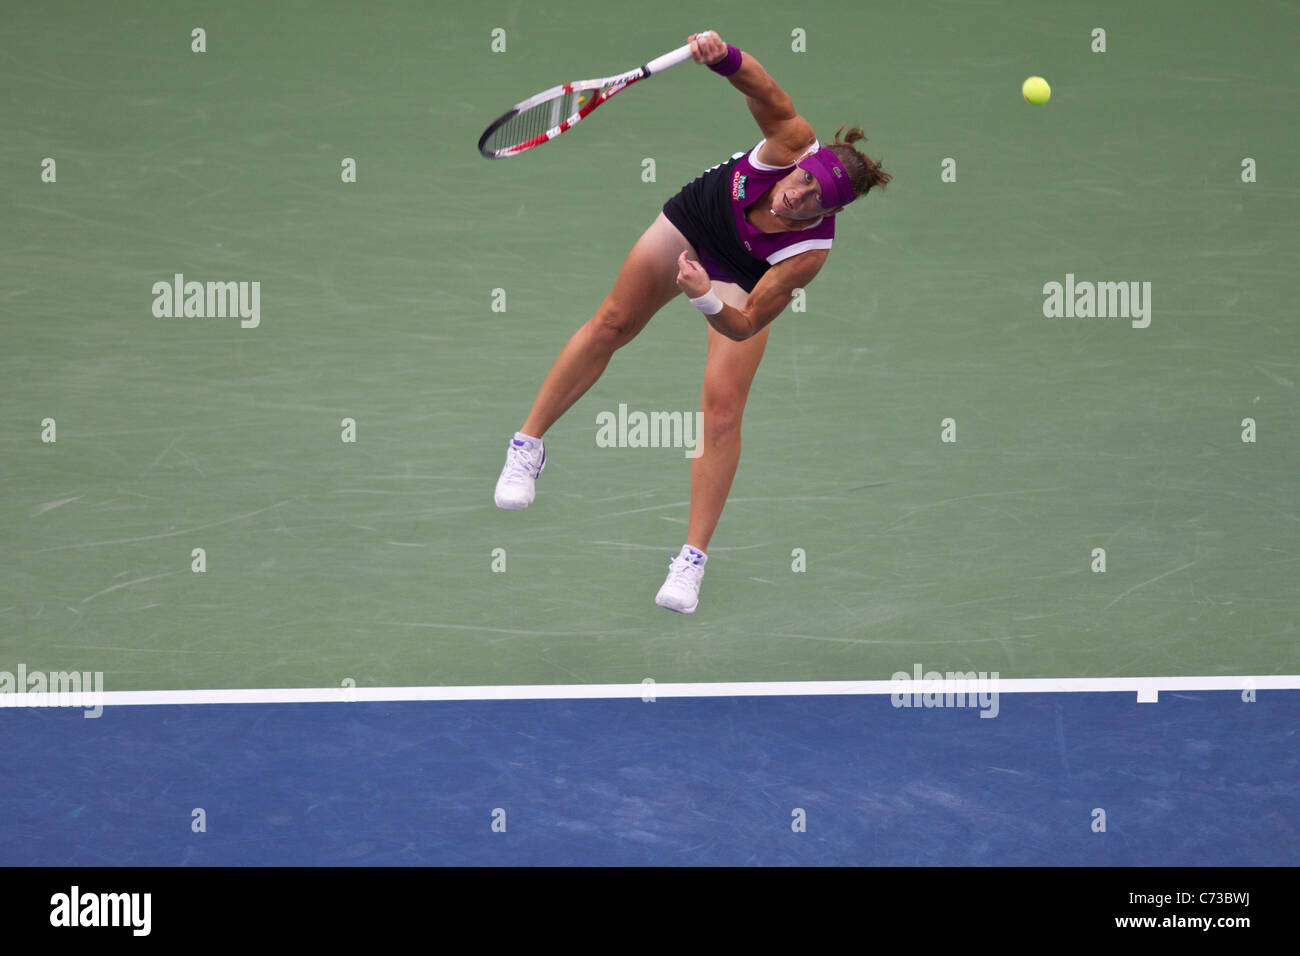 Samantha Stosur (AUS) winner of the Women's Final at the 2011 US Open Tennis Championships. Stock Photo